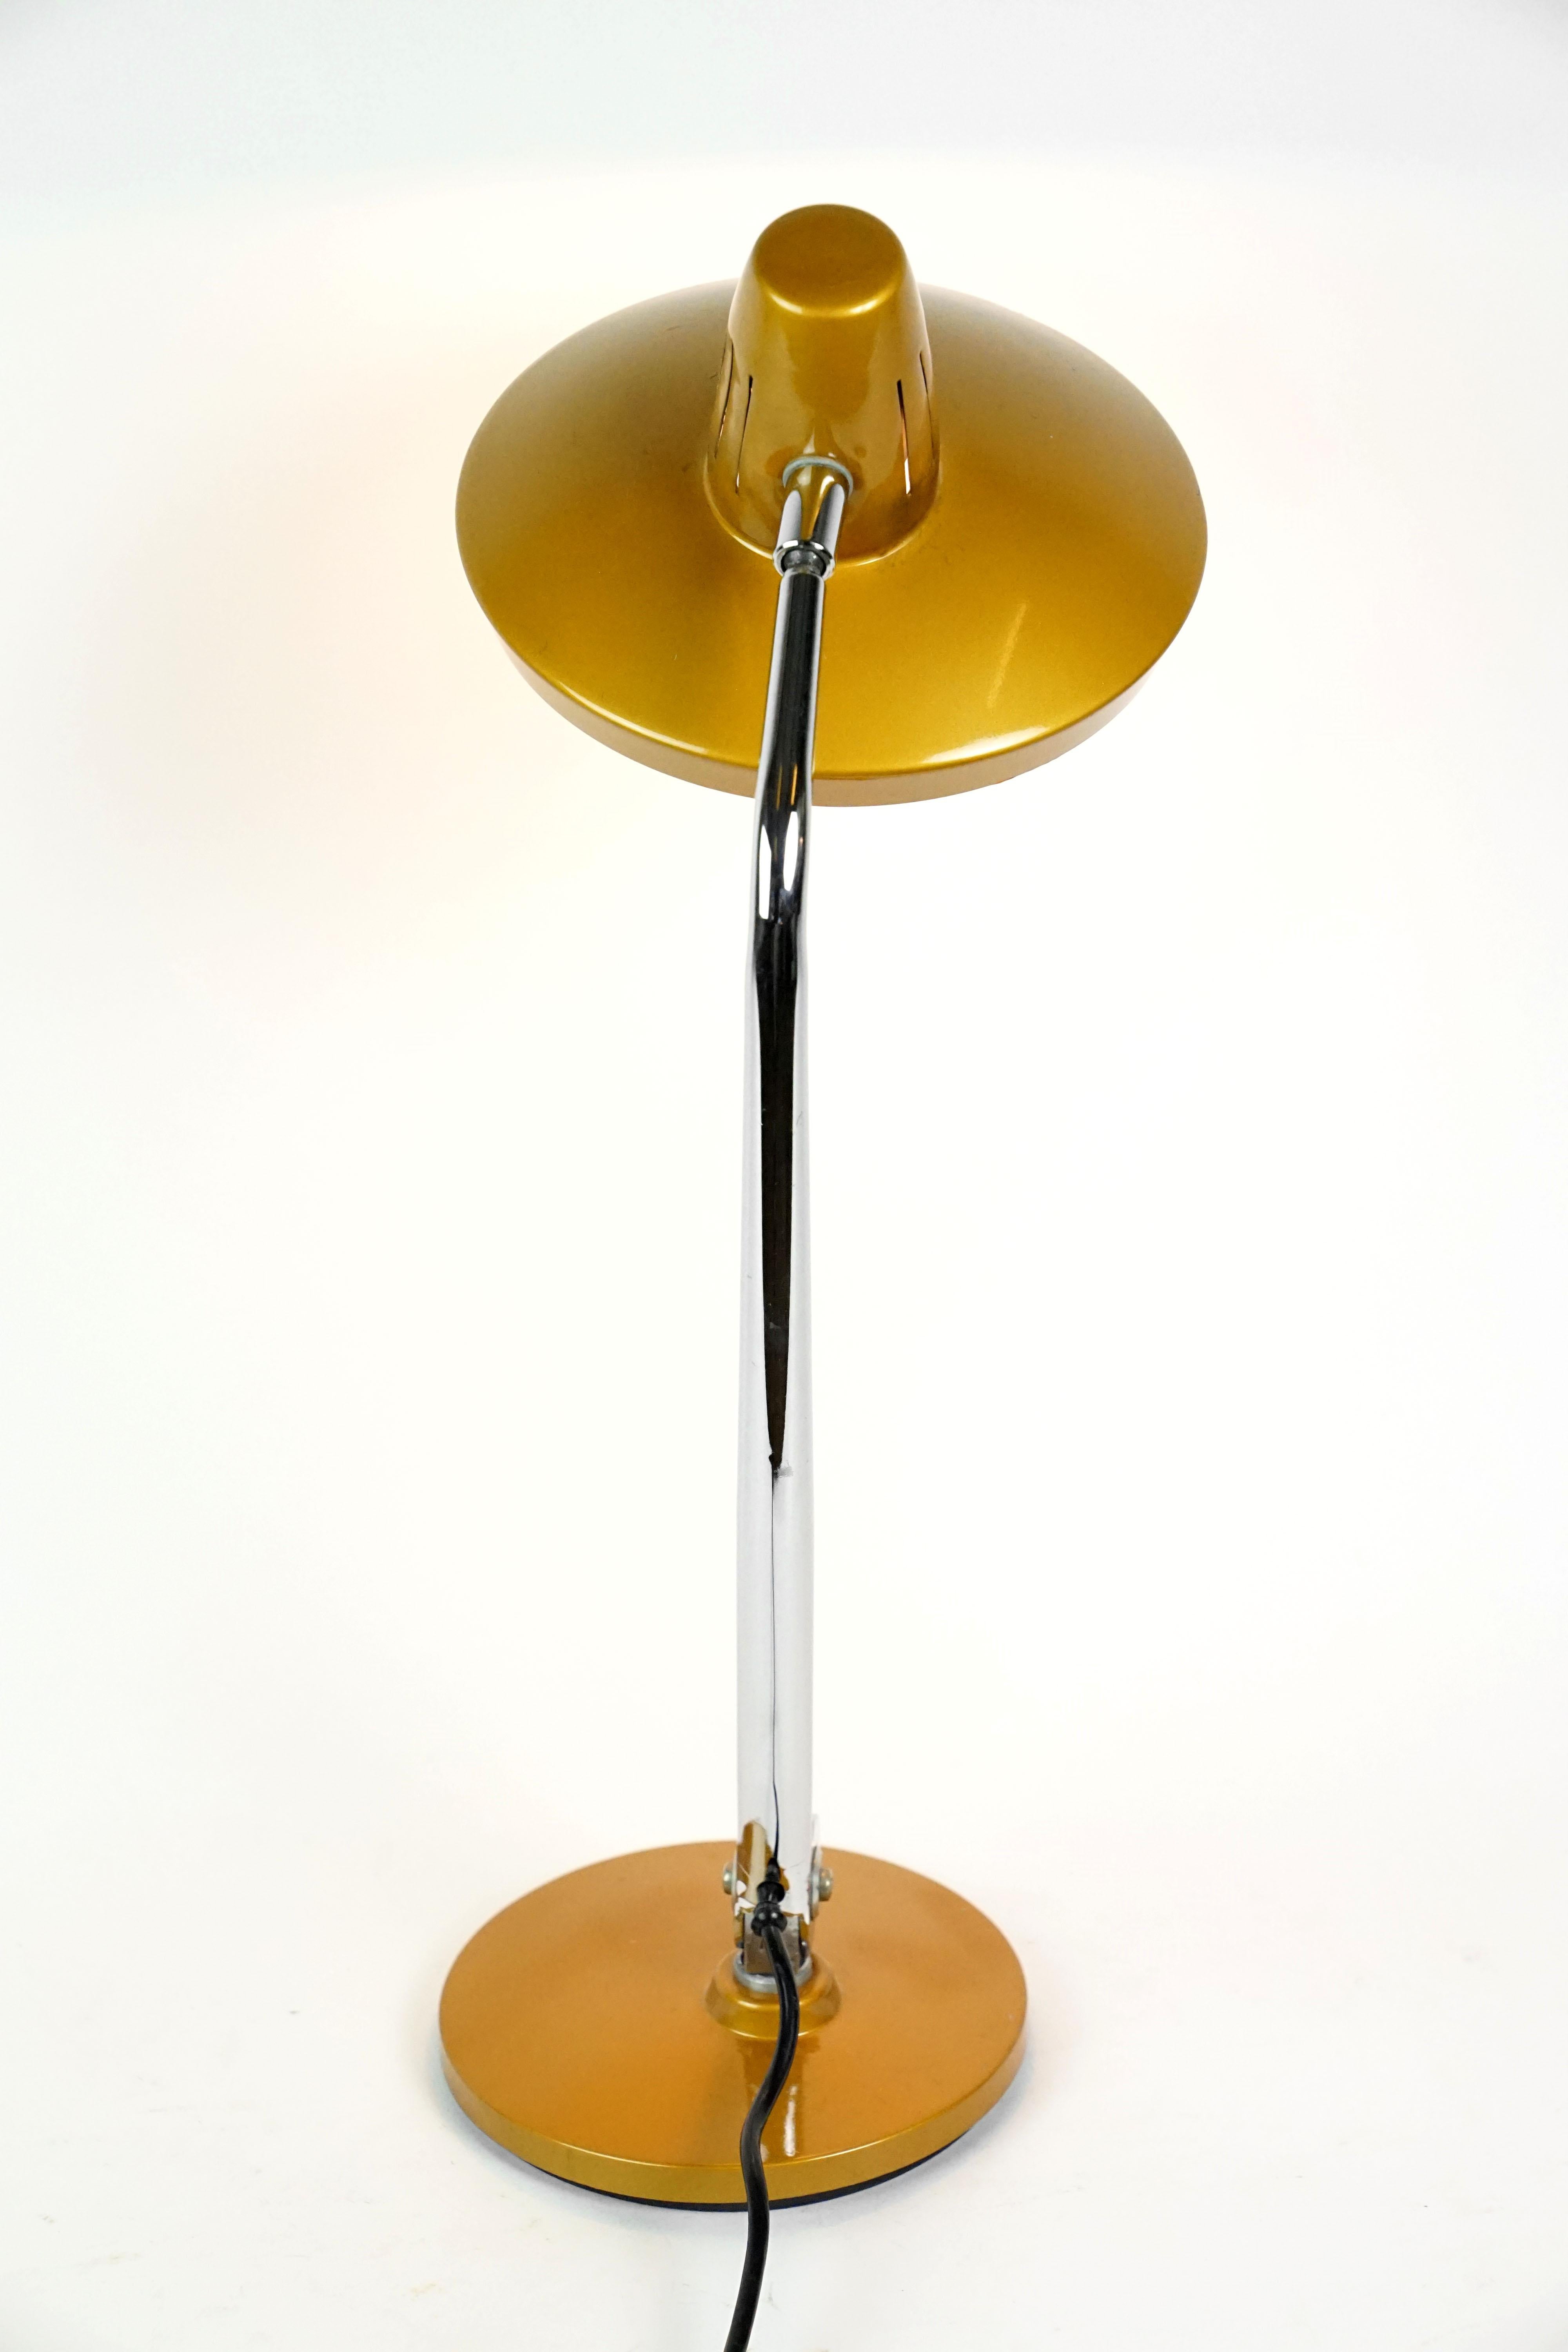 Copper colored table lamp by Fase Madrid, Spain in the 1960s.
The lamp is adjustable. One bulb E27 (max. 60W) working for wired Austrian application. 
Original copper lacquer finish.